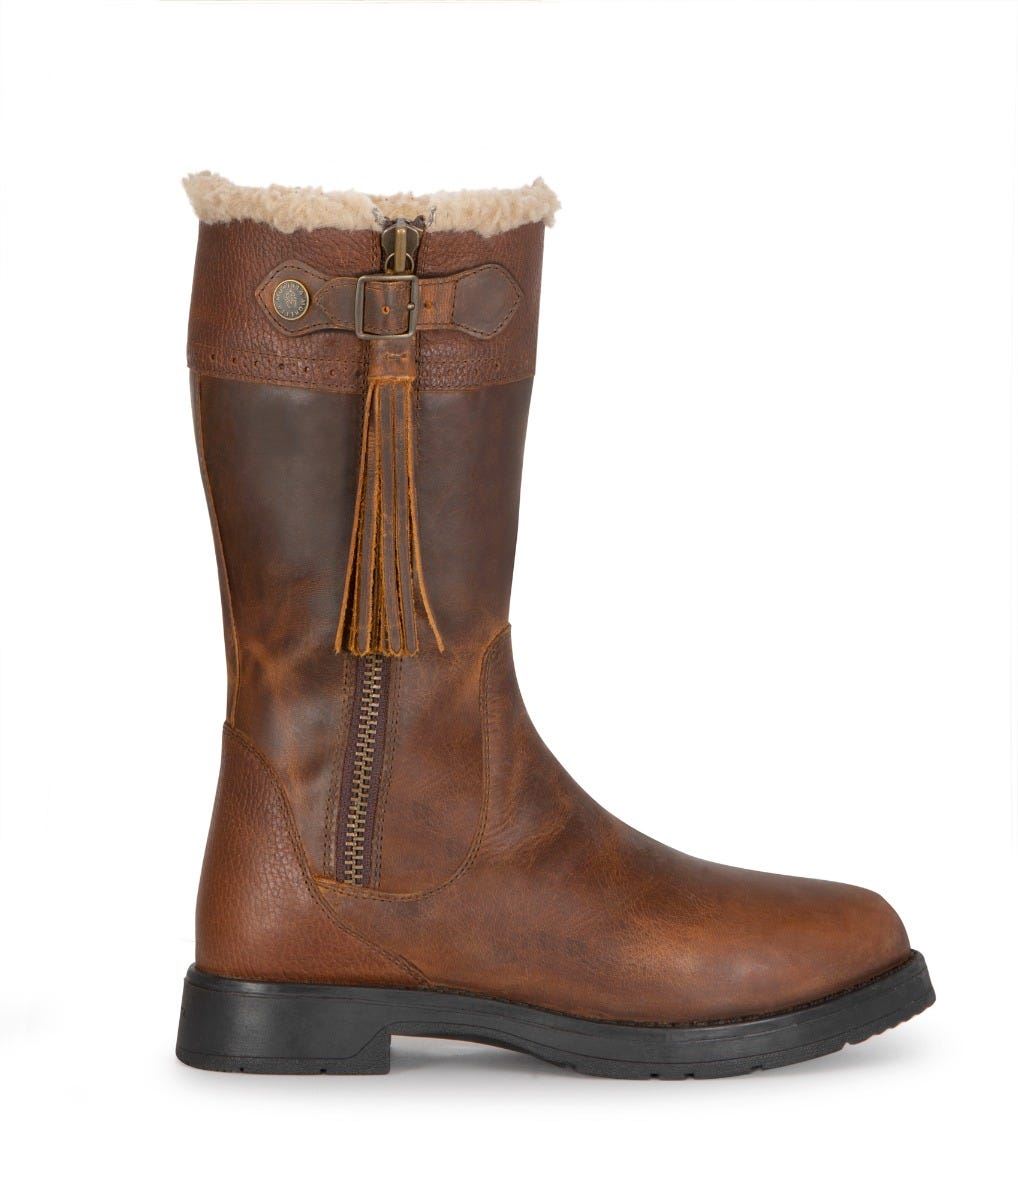 Shires Moretta Amelda Country Boots - Just Horse Riders